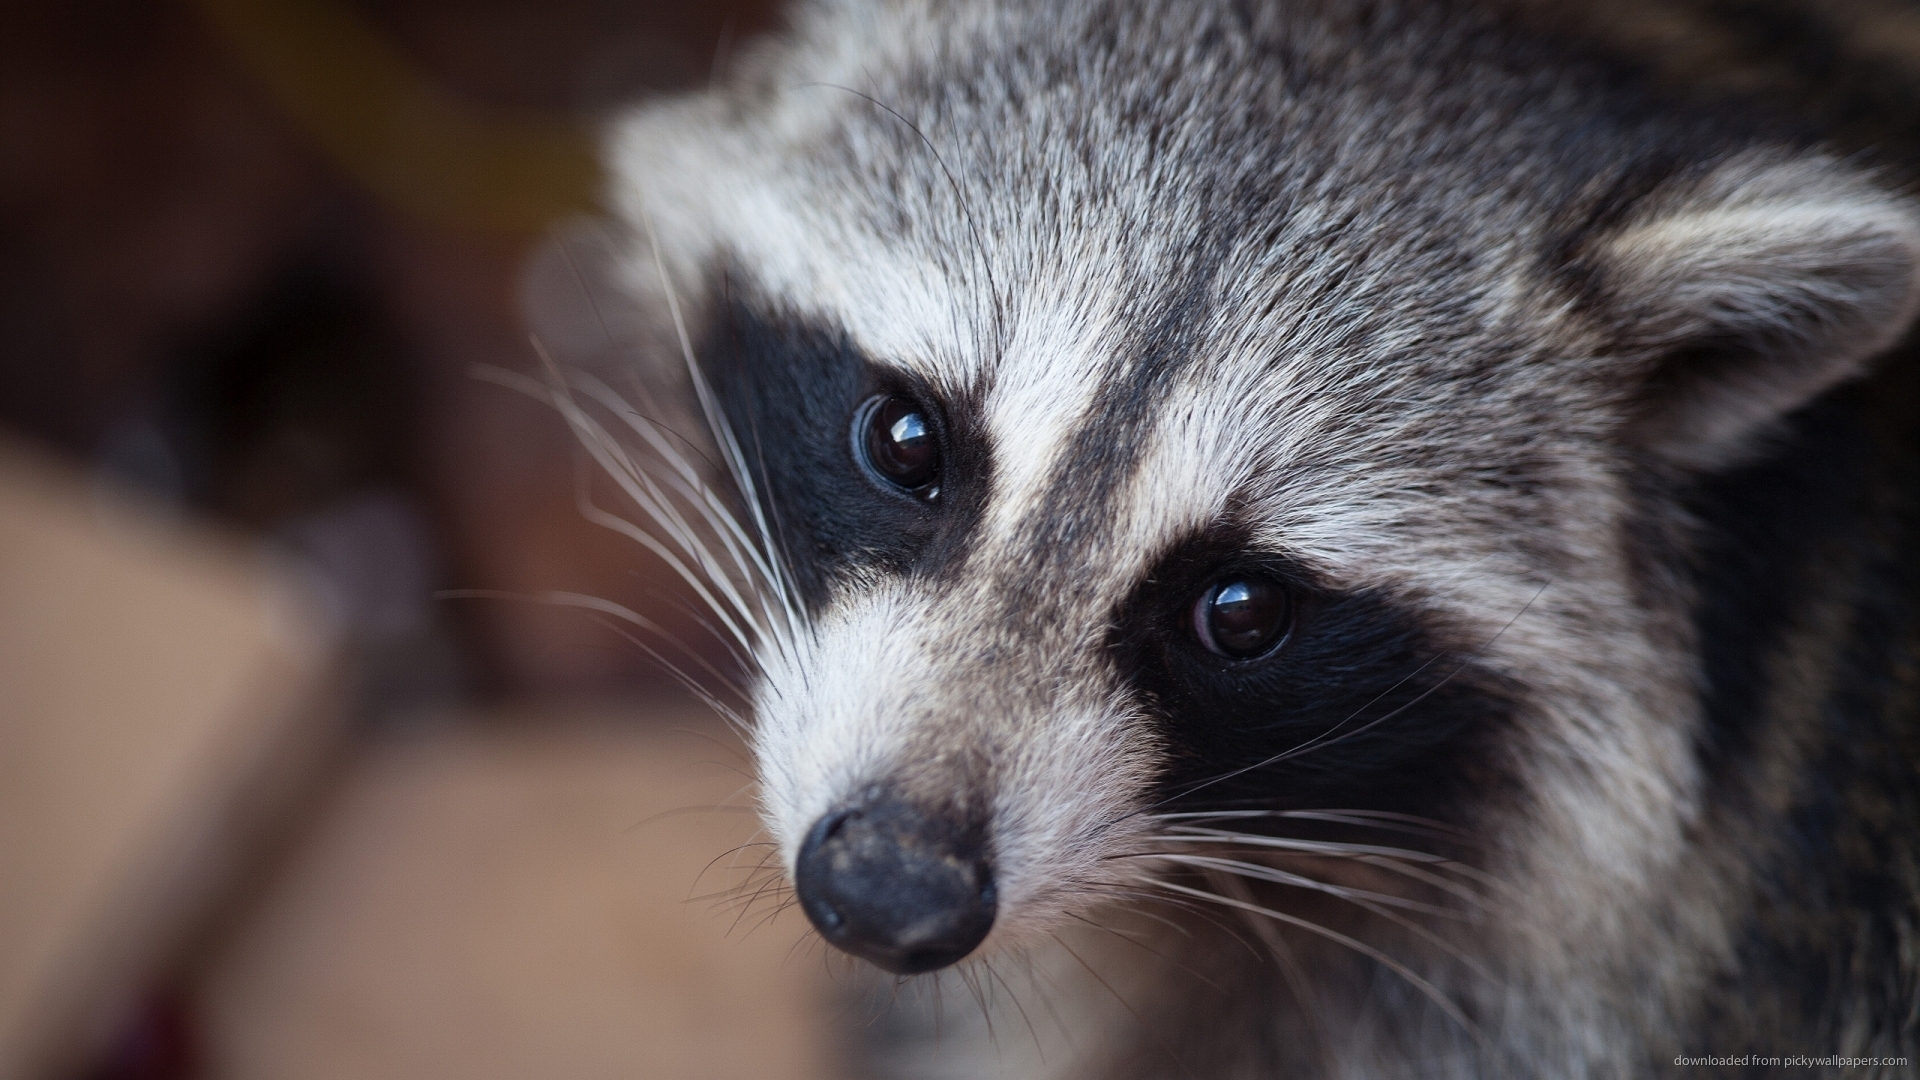 Raccoon Animal Up Close Wallpaper Picture For iPhone Blackberry iPad